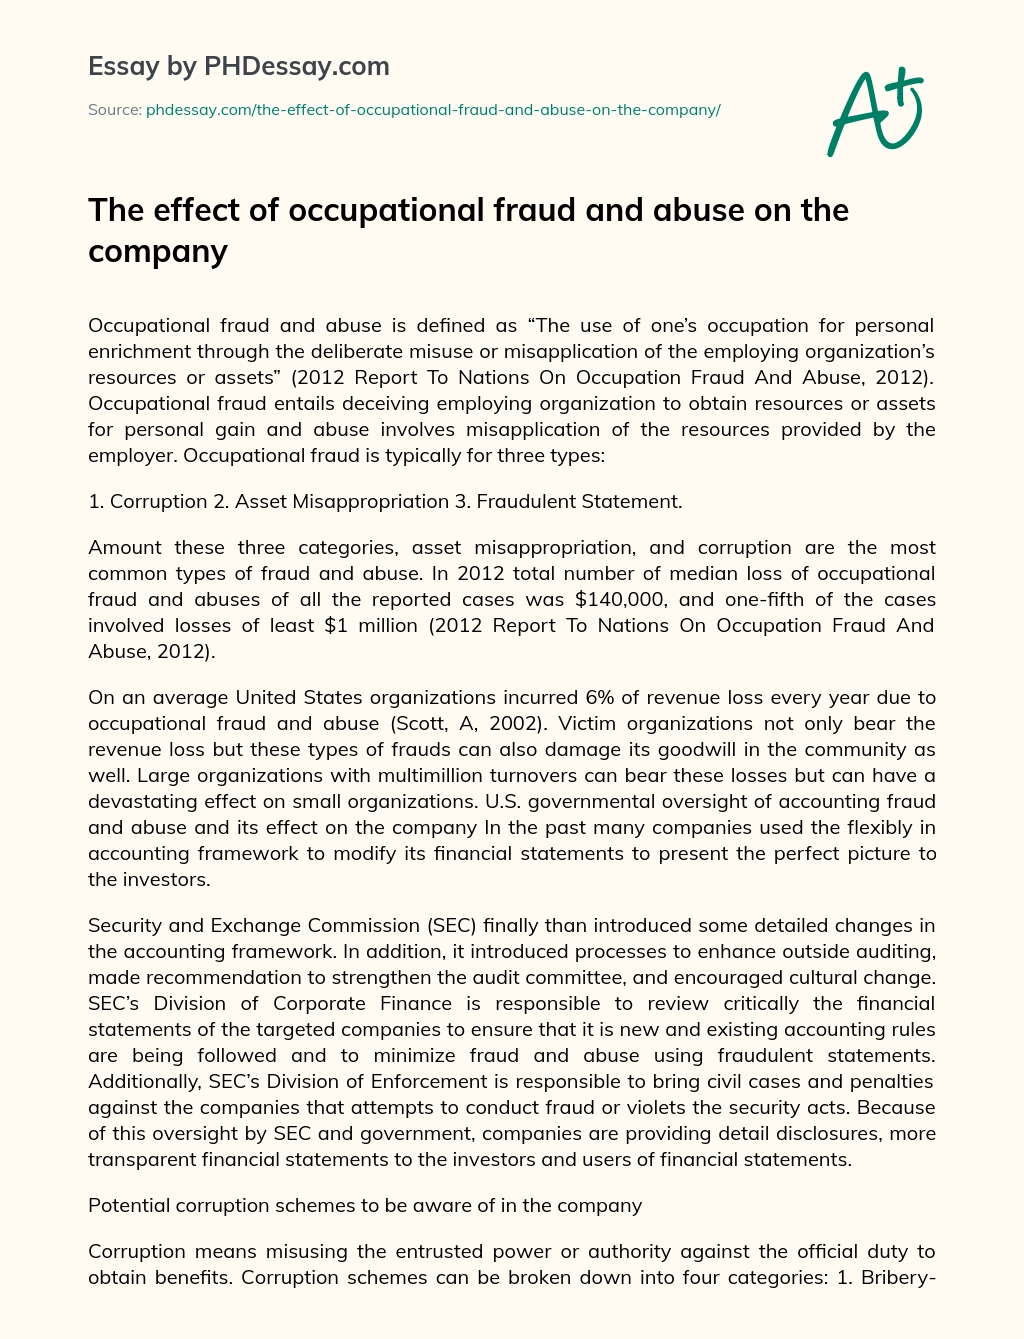 The effect of occupational fraud and abuse on the company essay